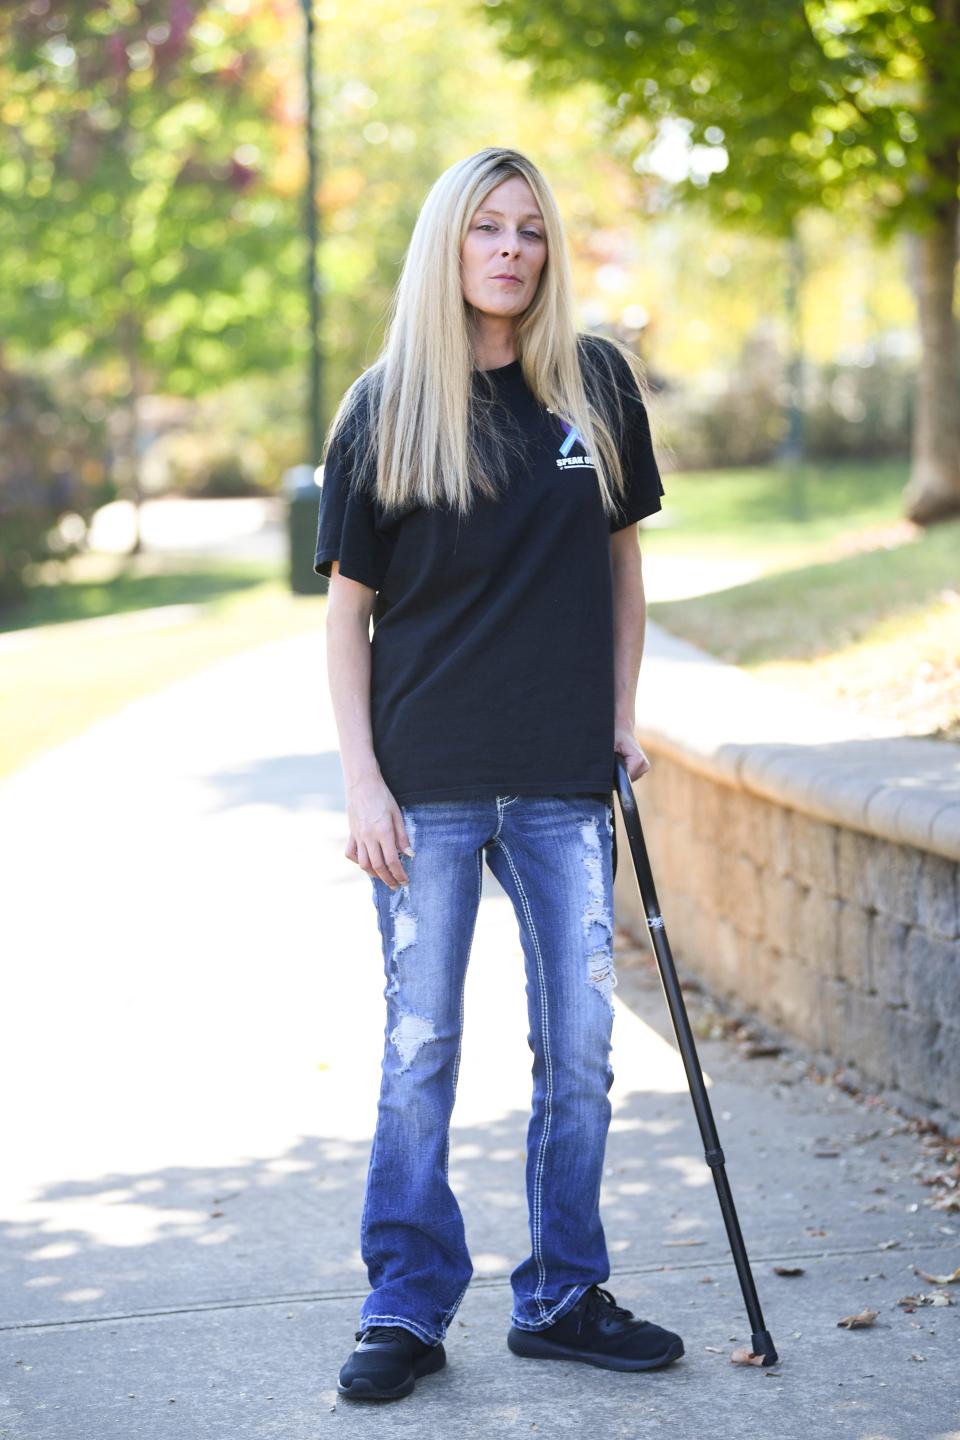 Mikayla Evans, who fell five stories from a condo in Johnson City in 2020, poses for a photo in Johnson City, Thursday, Oct. 12, 2023. Evans is now fighting to have her voice heard in the case of an alleged serial rapist that has rocked the town of Johnson City with allegations of police corruption, two federal lawsuits and a scathing audit that exposed systemic failures in the way police investigated sexual assaults.